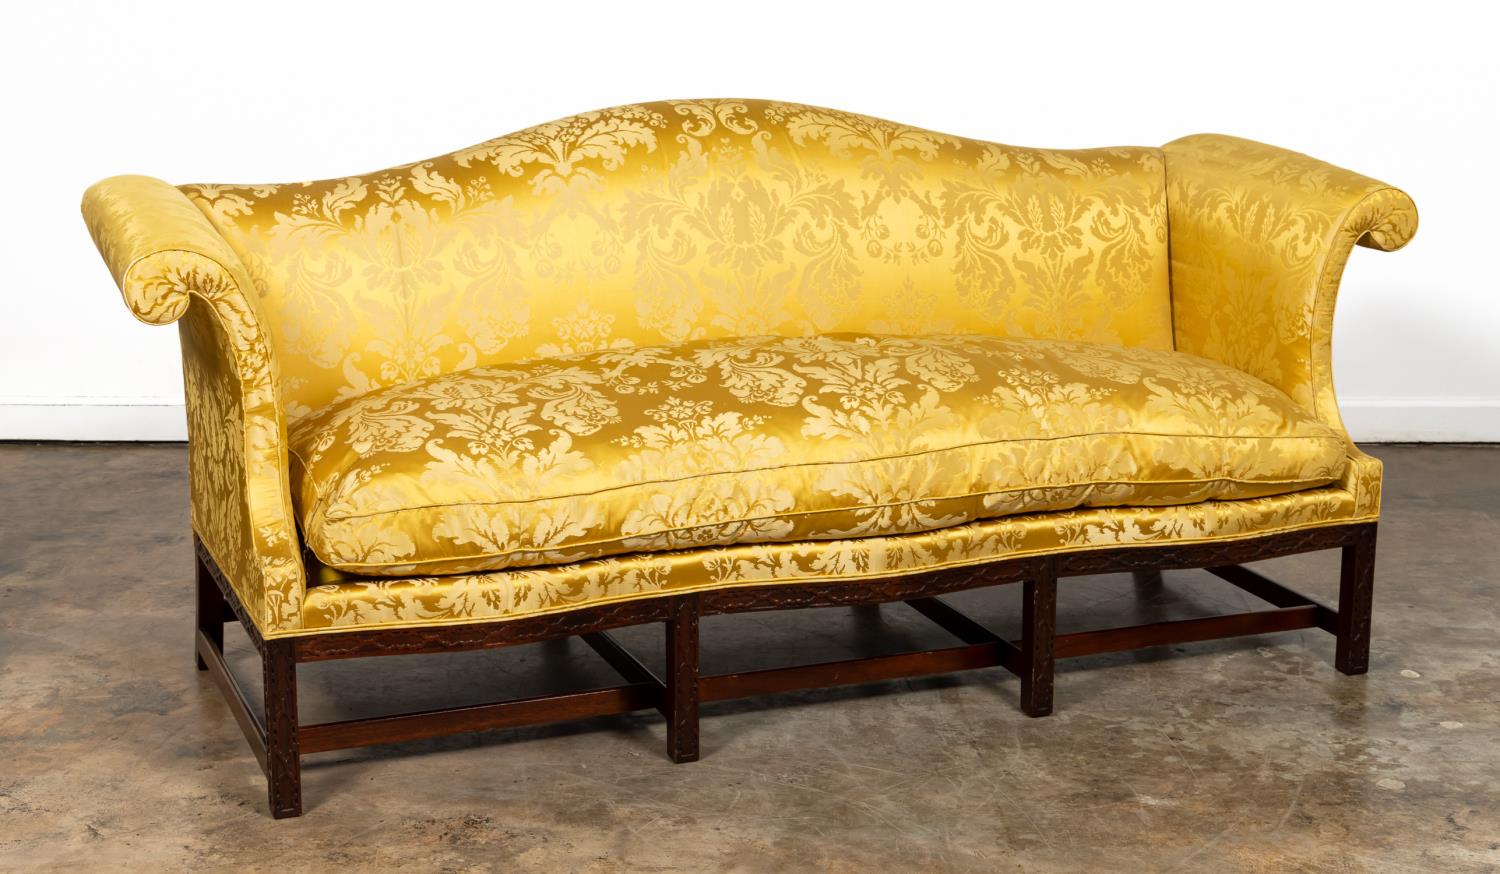 CHINESE CHIPPENDALE STYLE YELLOW